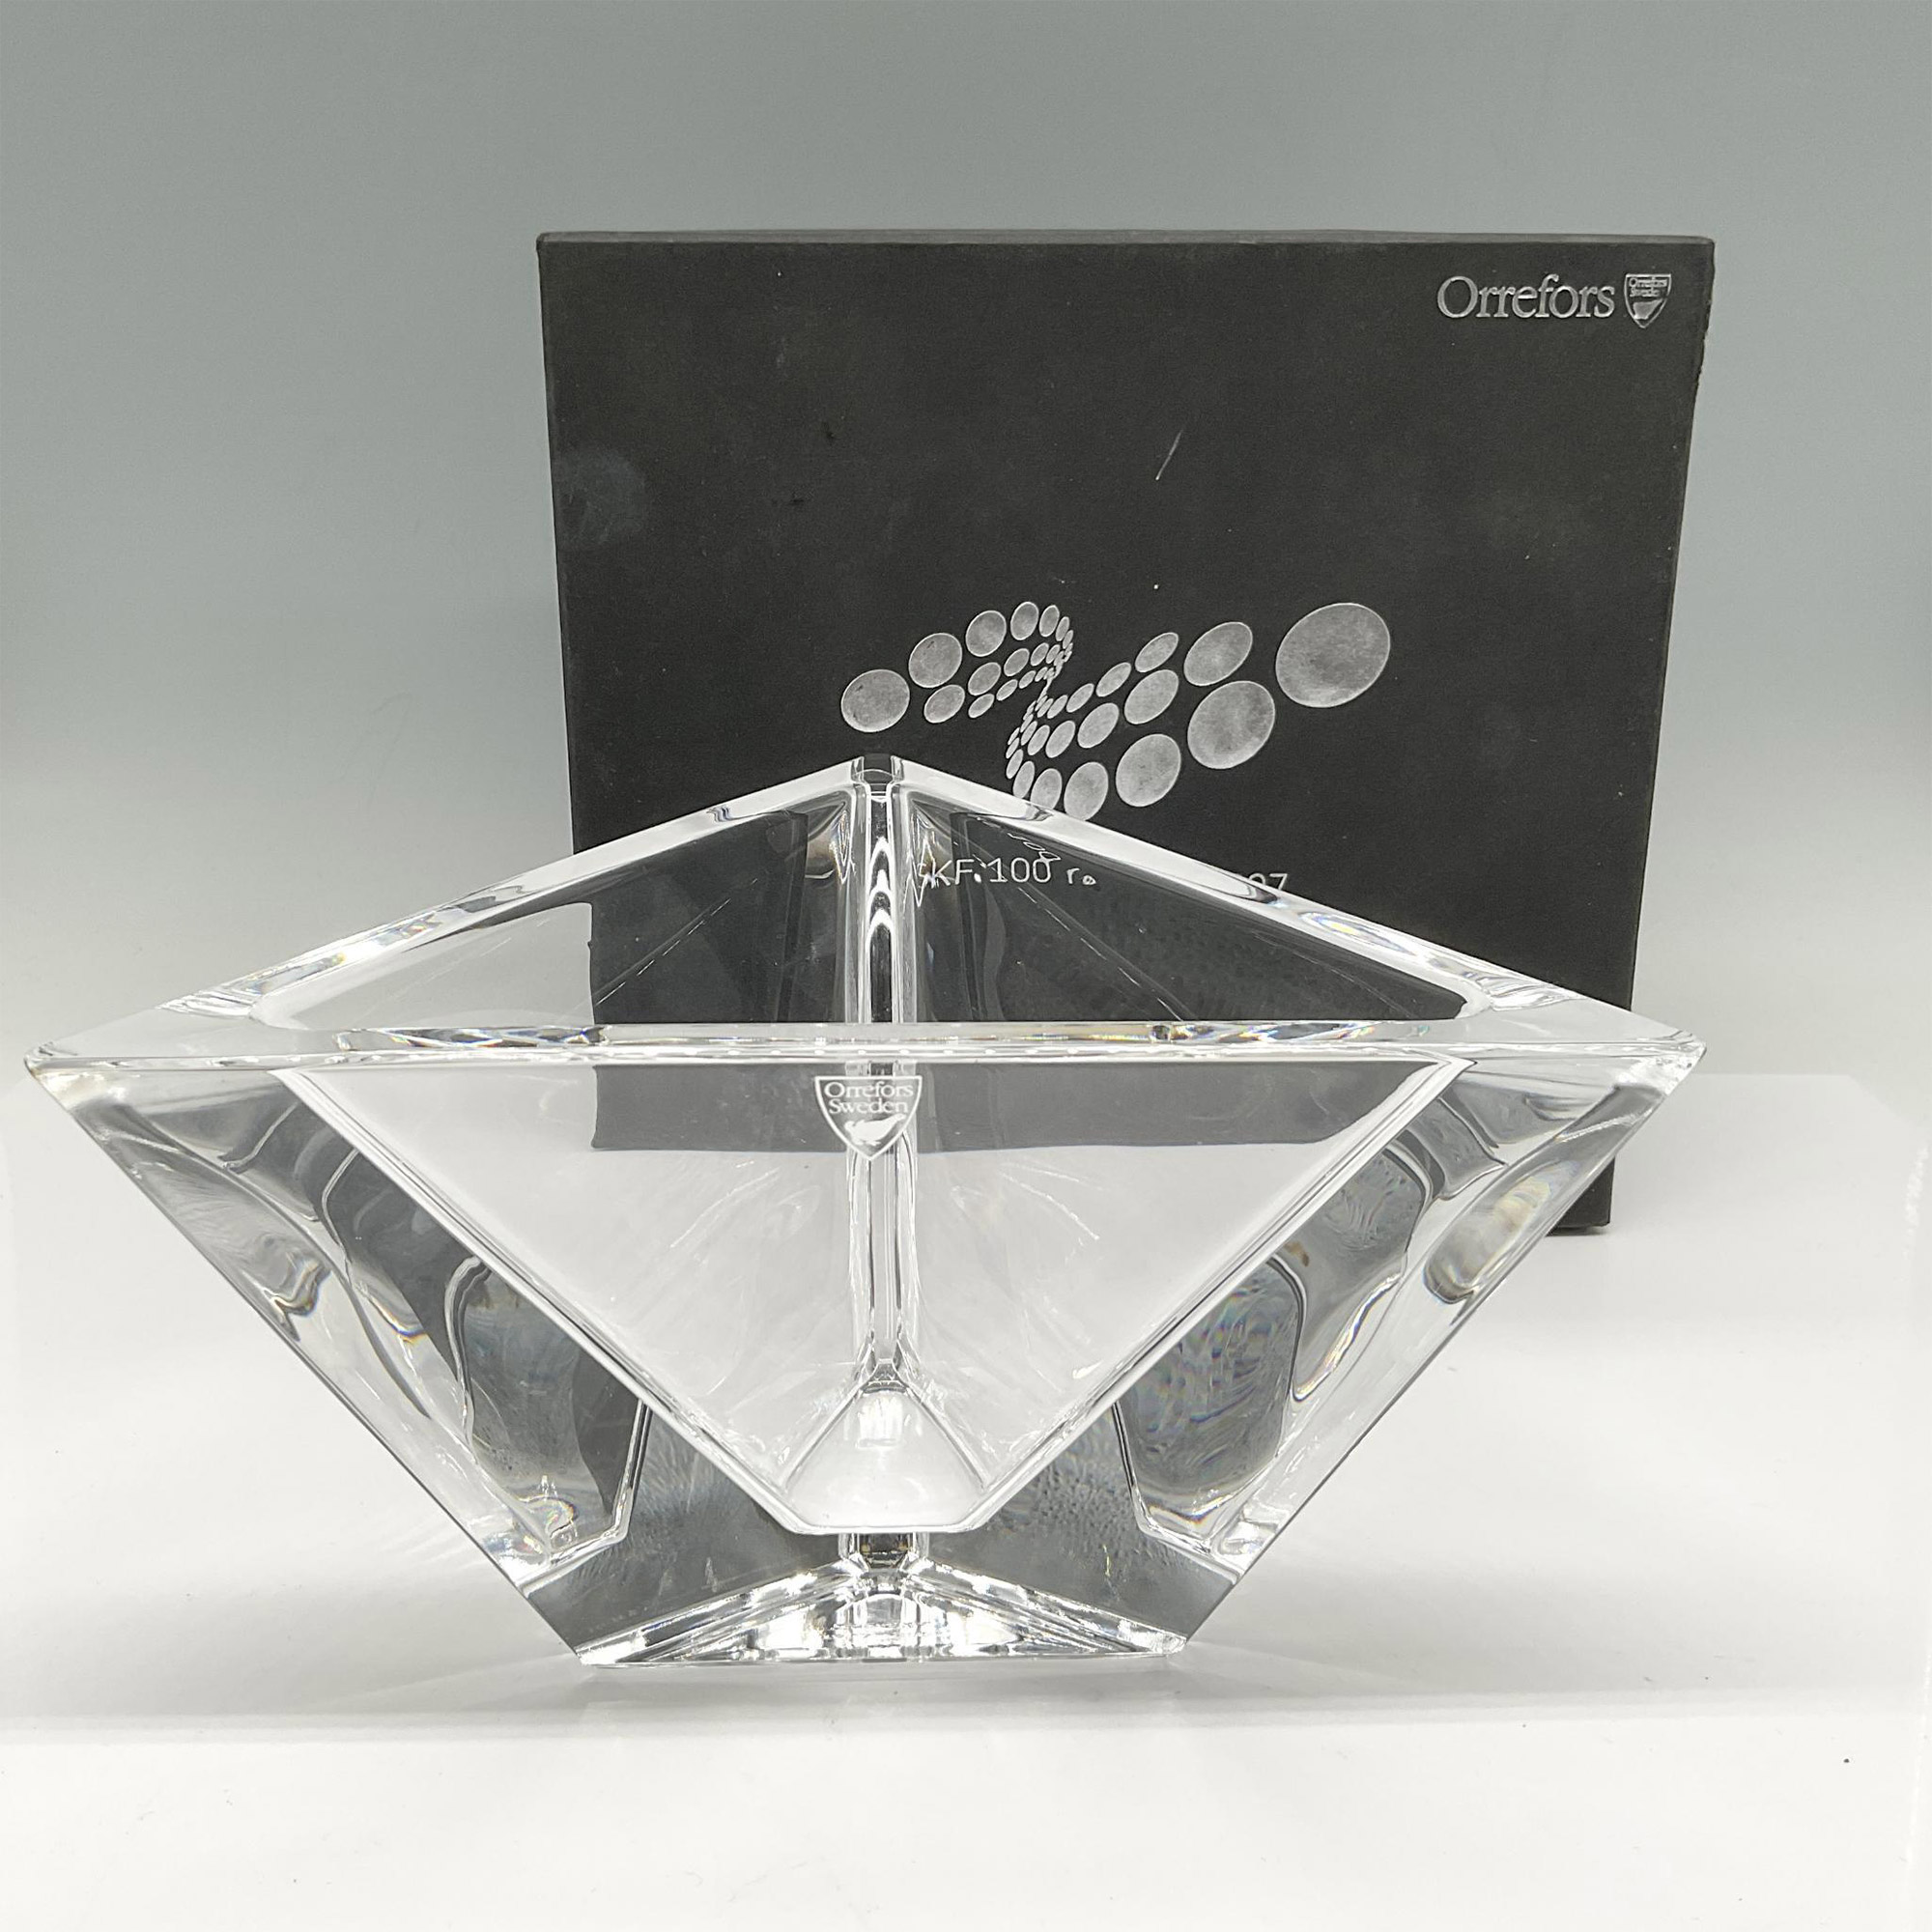 Orrefors Crystal Triangle Bowl - Image 4 of 4